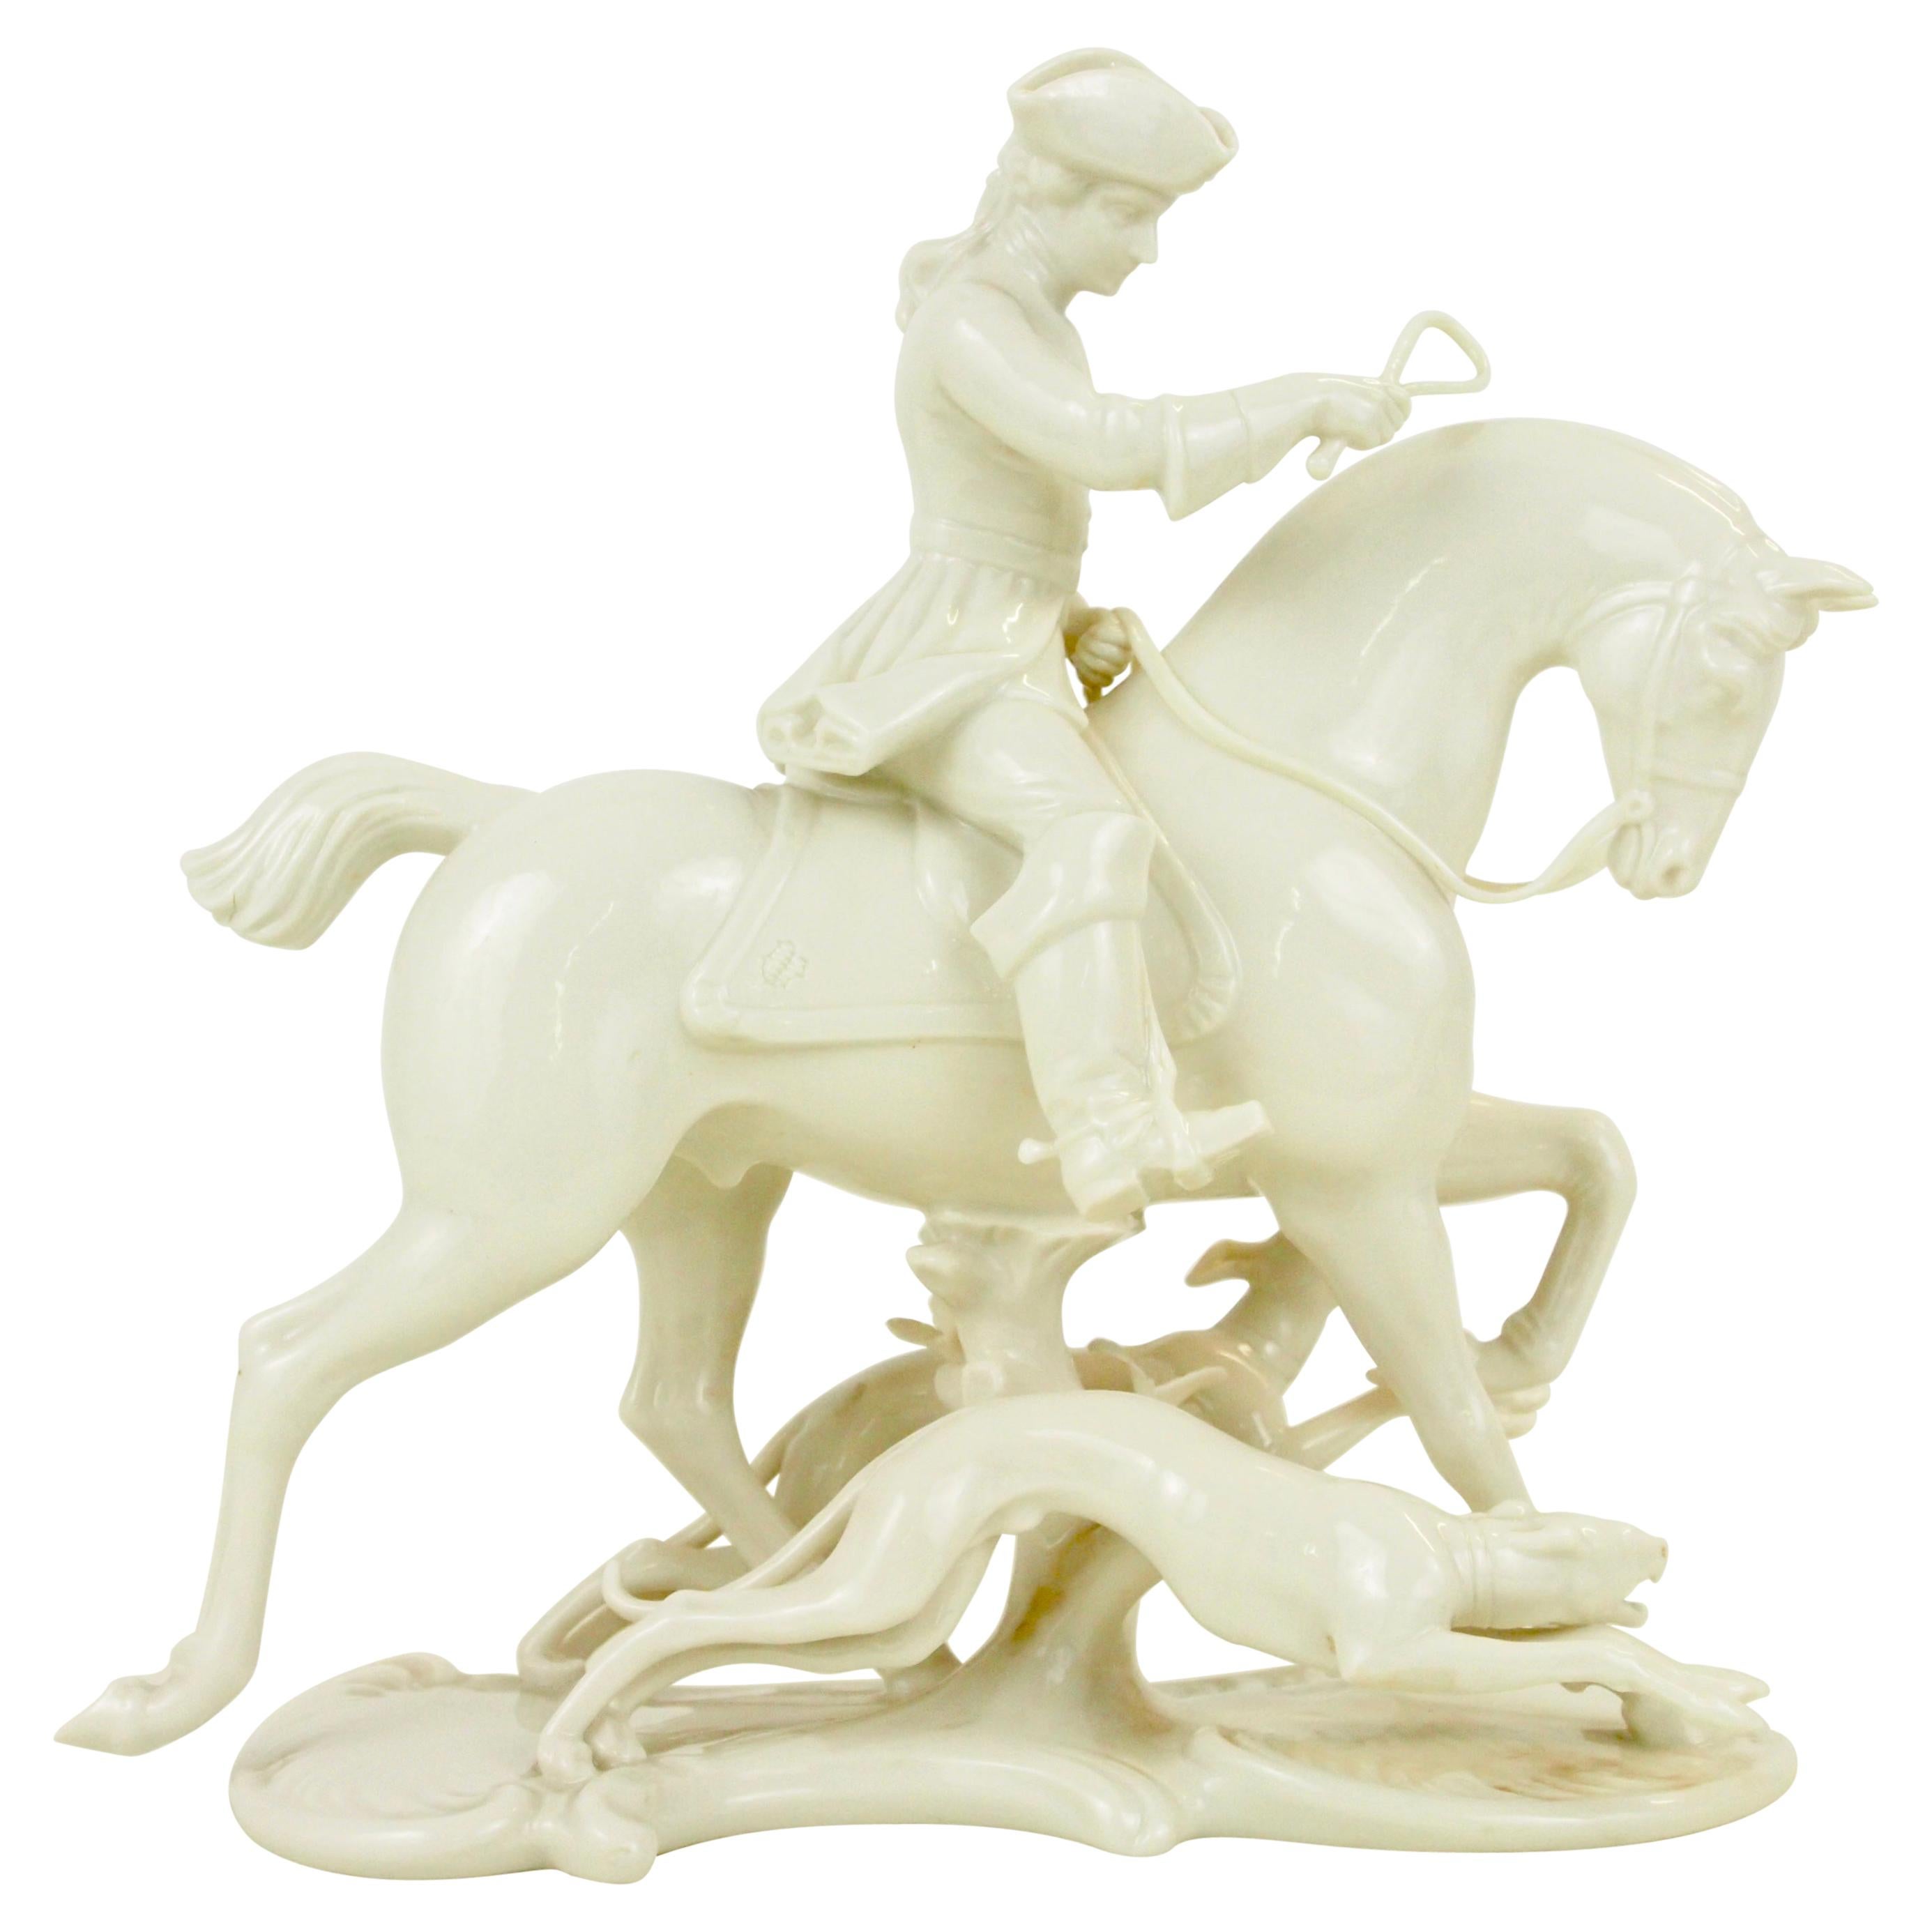 Nymphenburg Porcelain Figurine Depicting a Horse Rider in a Hunting Scene For Sale